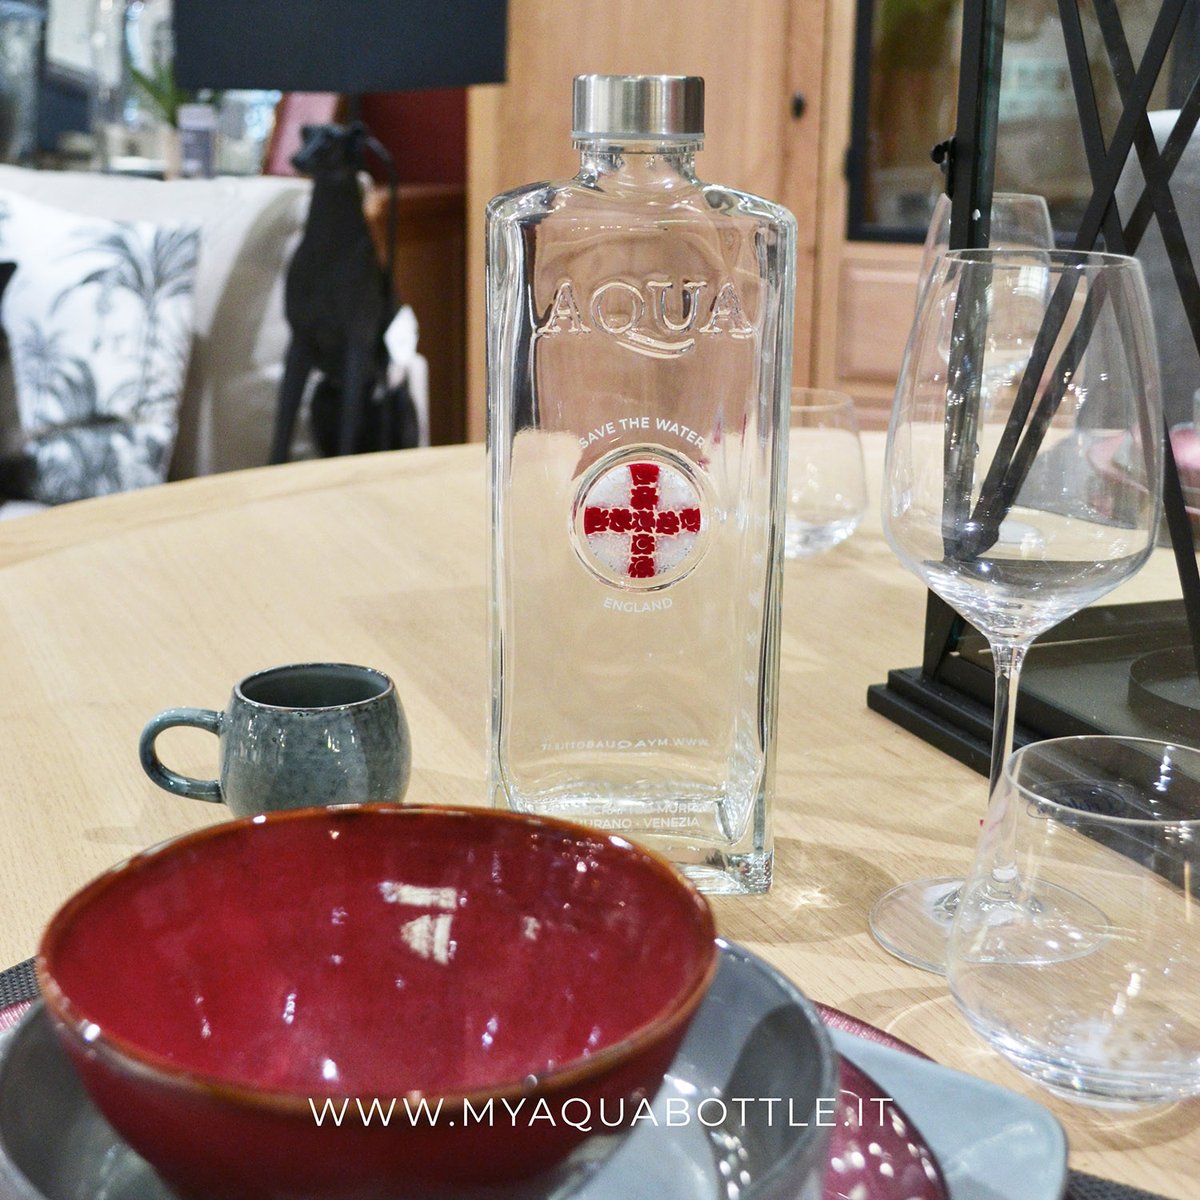 Decorating your home with green & ecological solutions is a way to save and respect the environment.
#MyAquabottle: artistic #glassbottle for still & sparkling water!
From our My Country Bottle collection: #MuranoGlass #Murrina - England Flag

#savetheplanet #ecologicaldesign